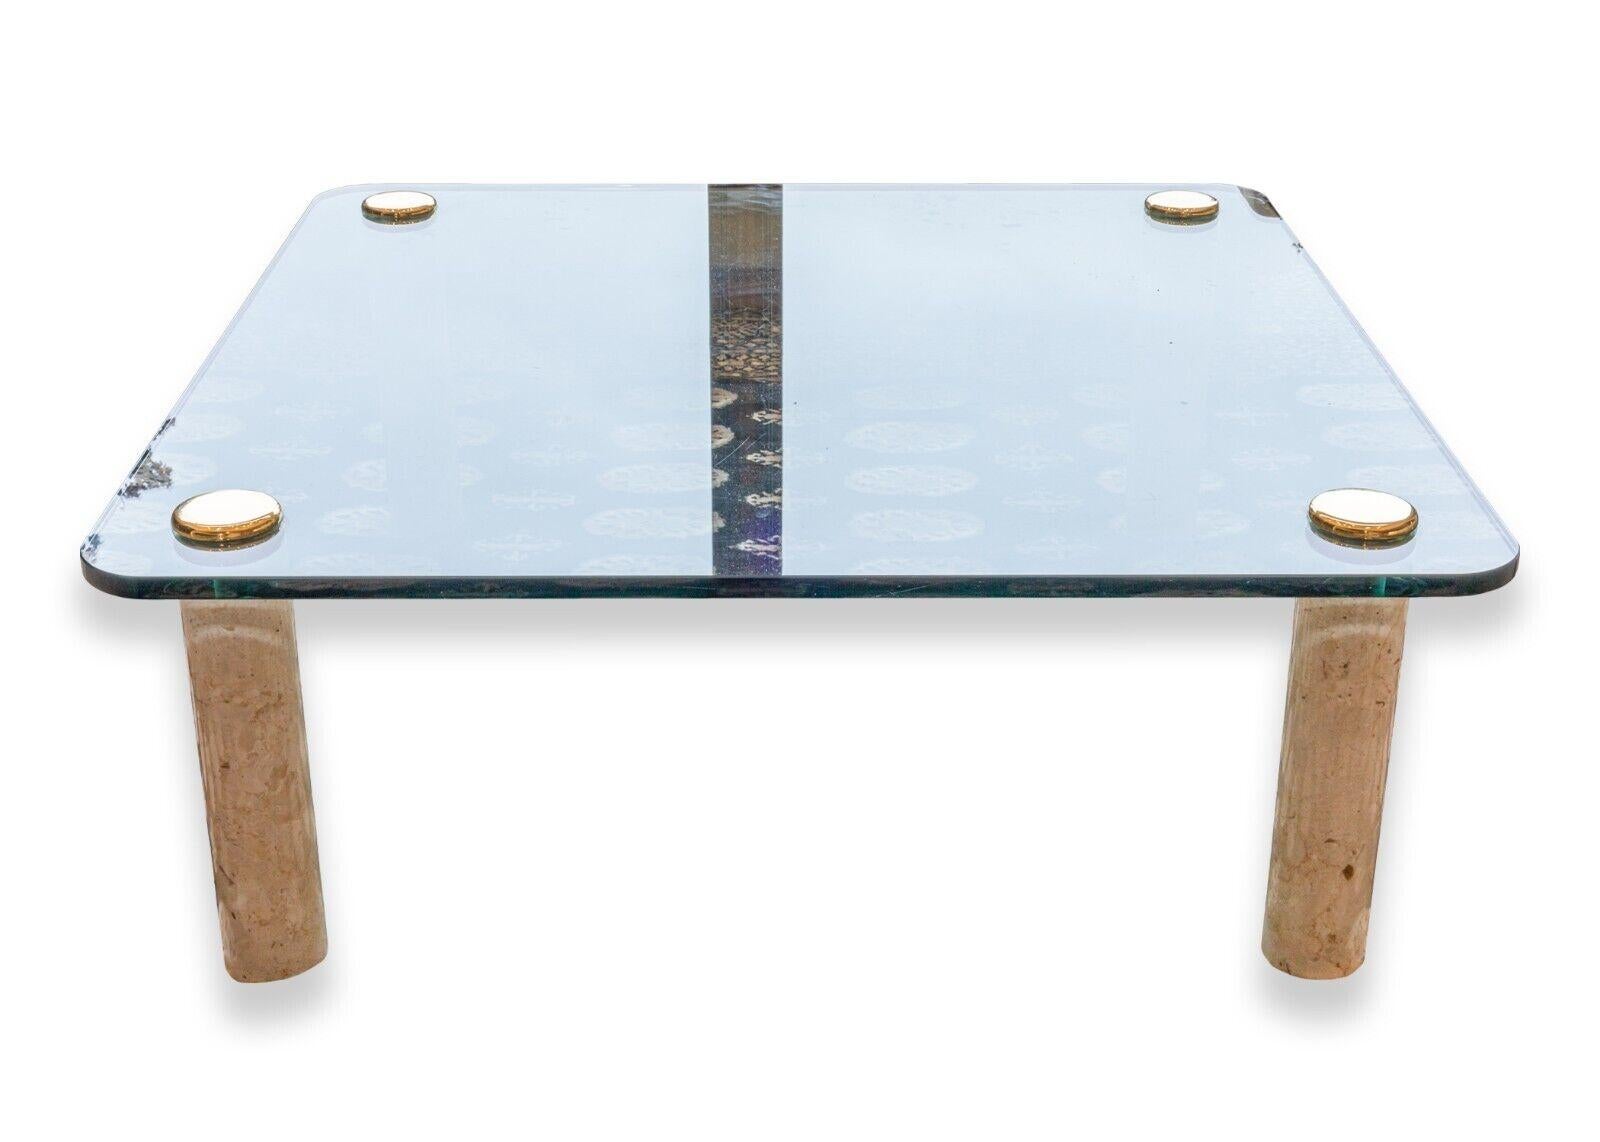 A Leon Rosen for Pace contemporary modern glass, marble, and brass coffee table. A beautiful coffee table featuring a thick cut square glass table top with rounded corners, gorgeous marble cylinder legs, and brass leg toppers. This table is in very